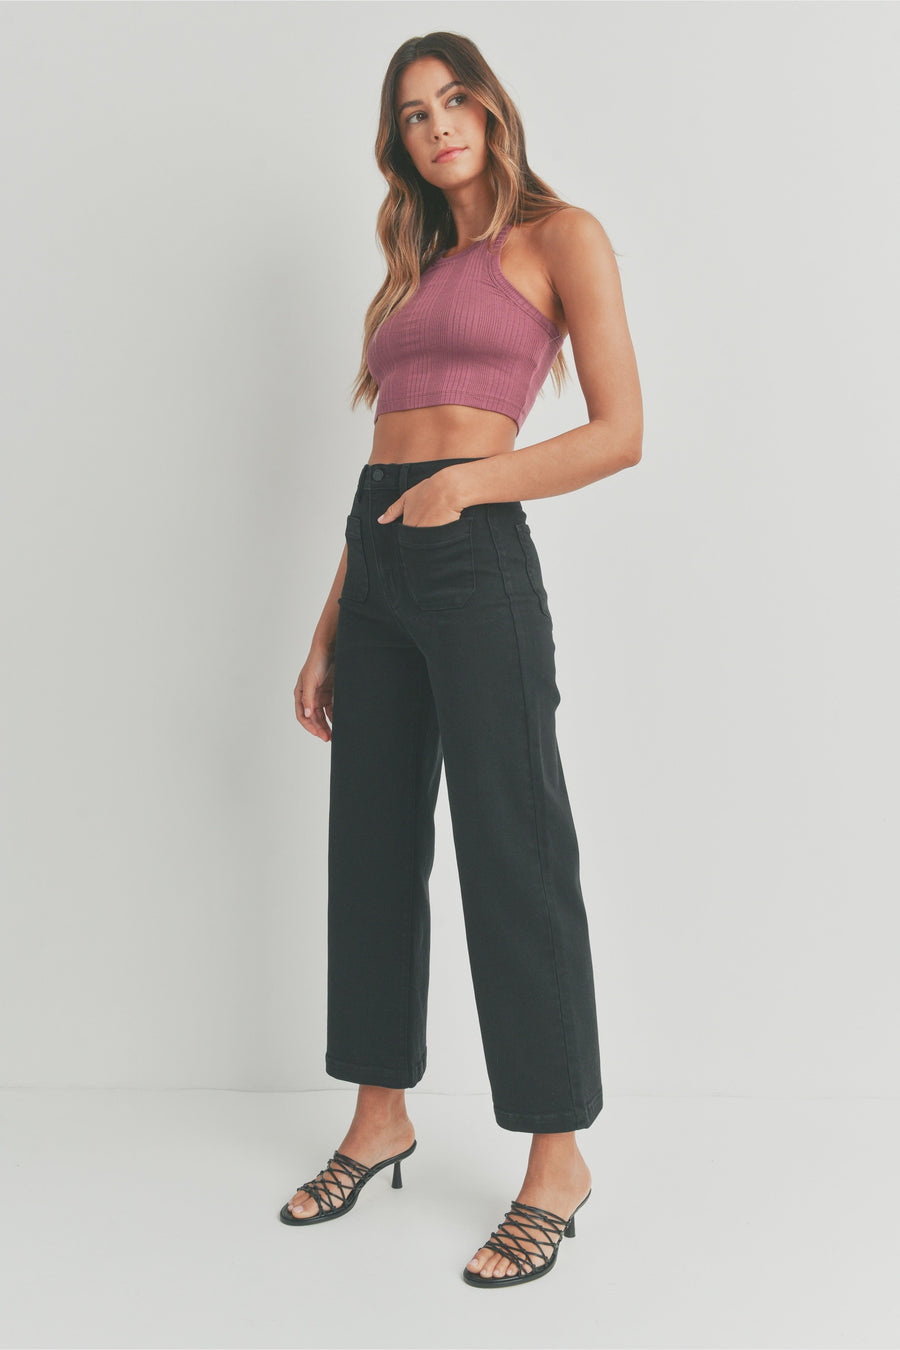 The Raley Patch Pocket Wide Leg Jeans by Just Black Denim